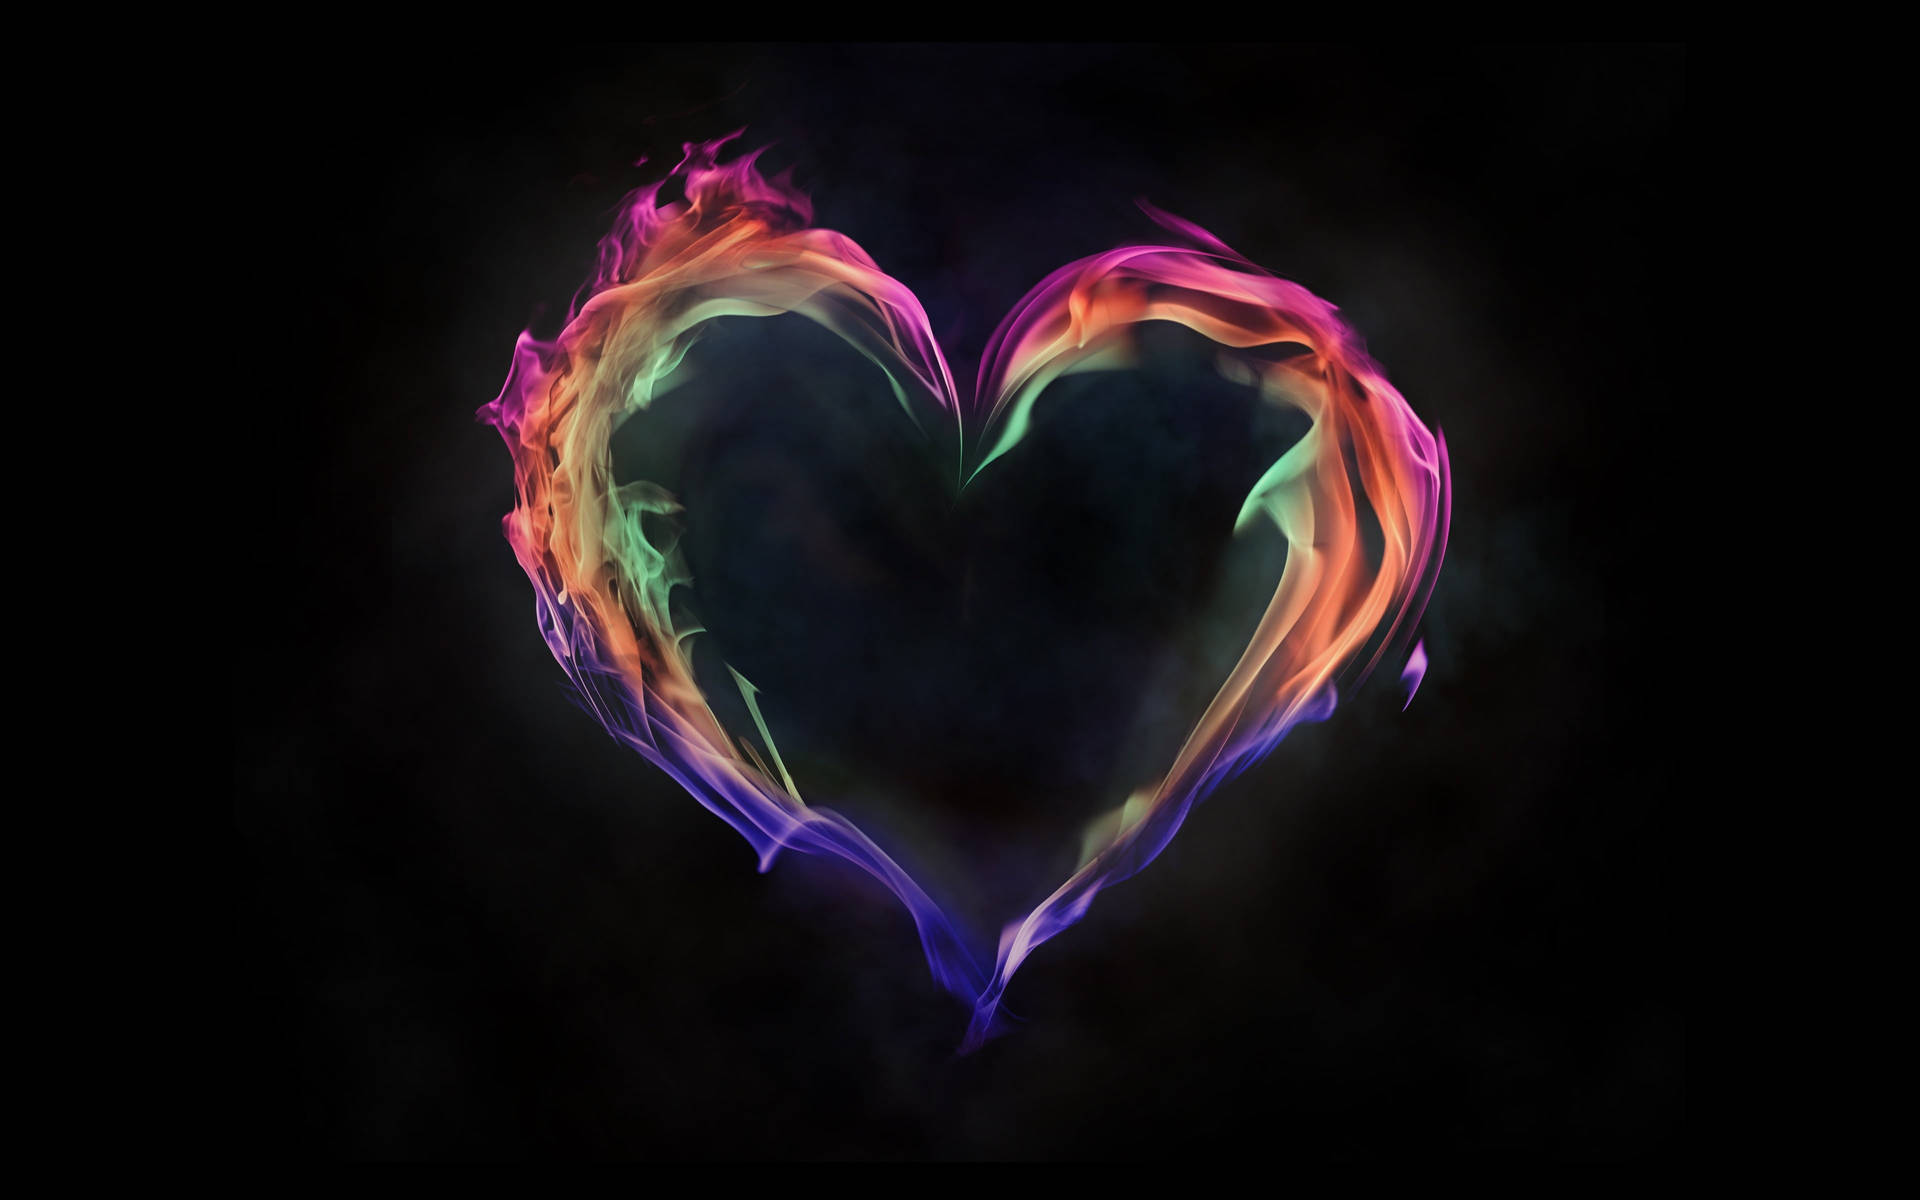 Creative Colorful Flaming Heart